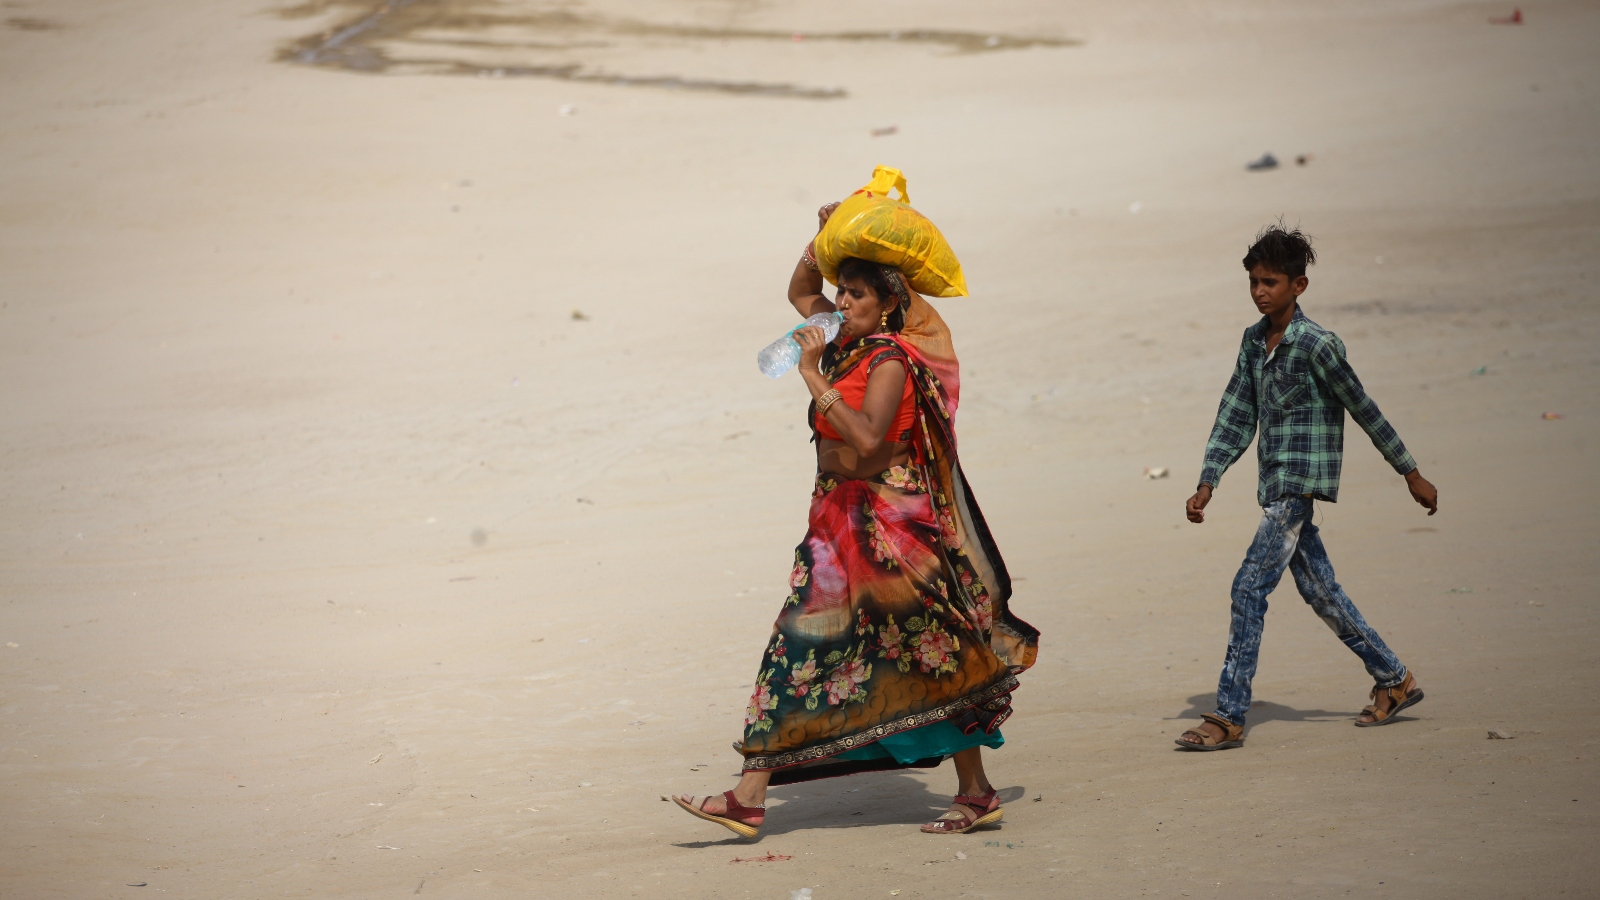 Two people walk in the sand, drinking water and wearing layers to protect from the sun.